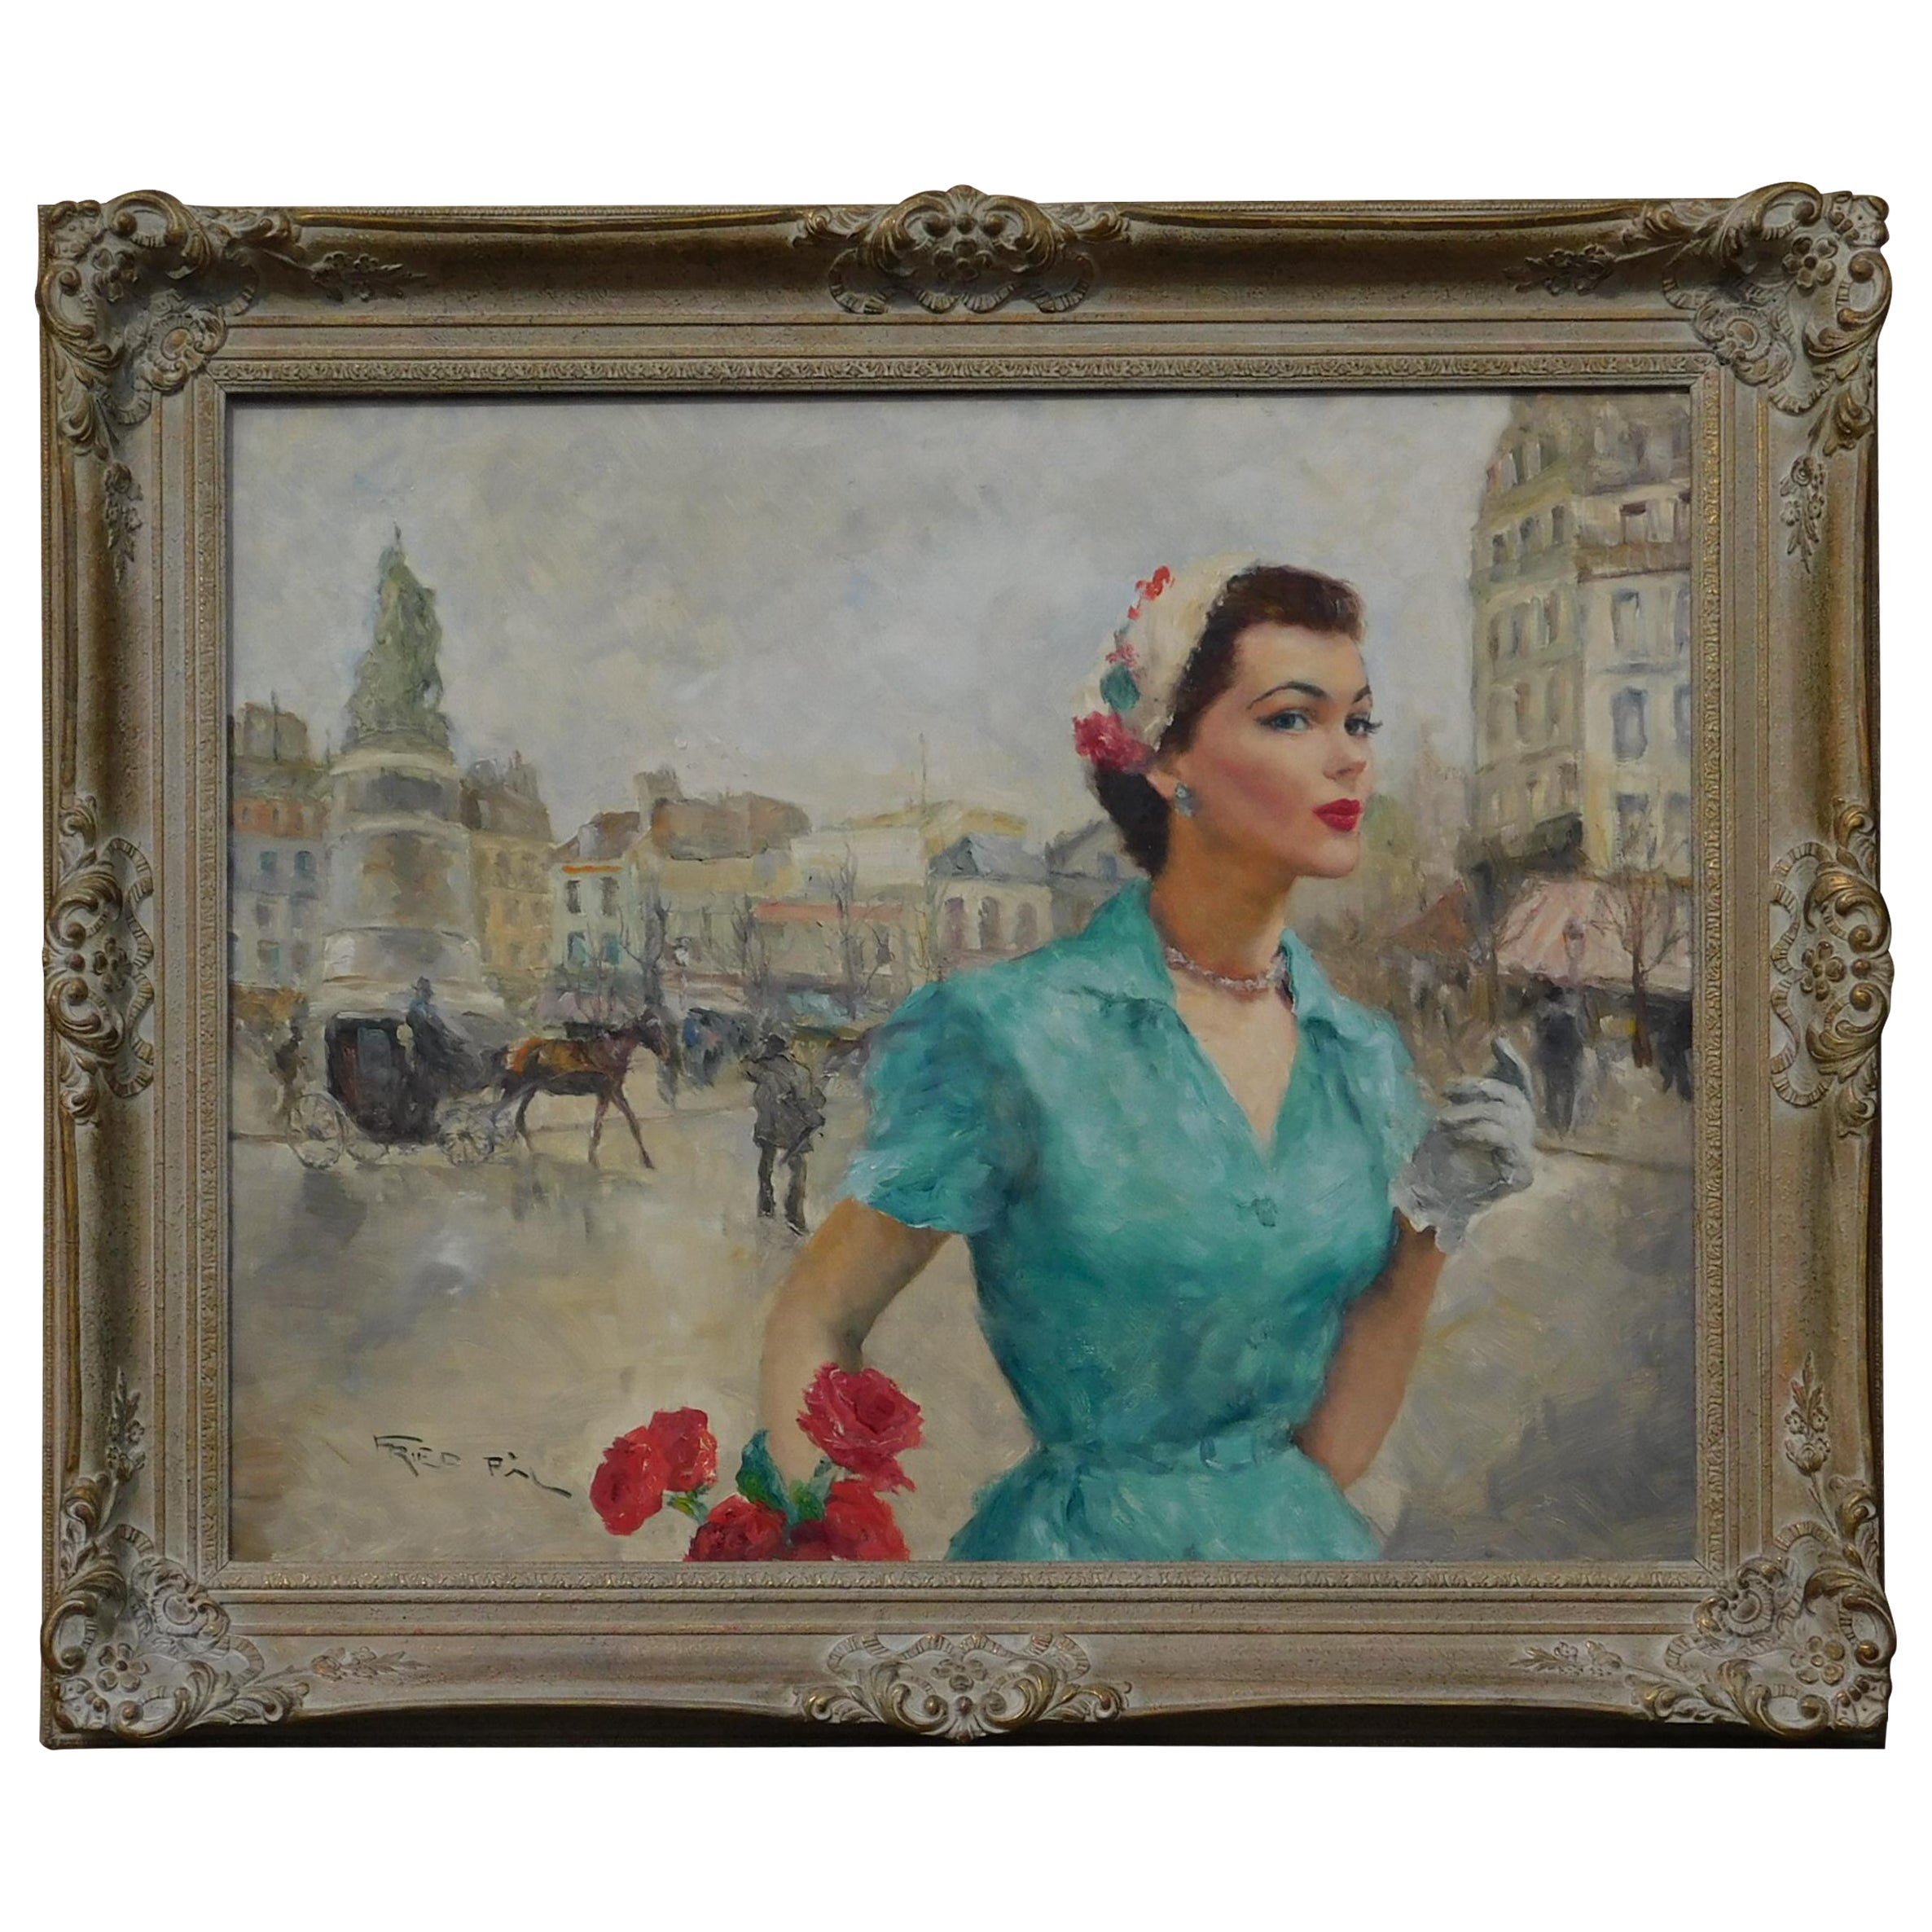 Pal Fried Oil on Canvas, Circa 1950's - Anabella in Paris